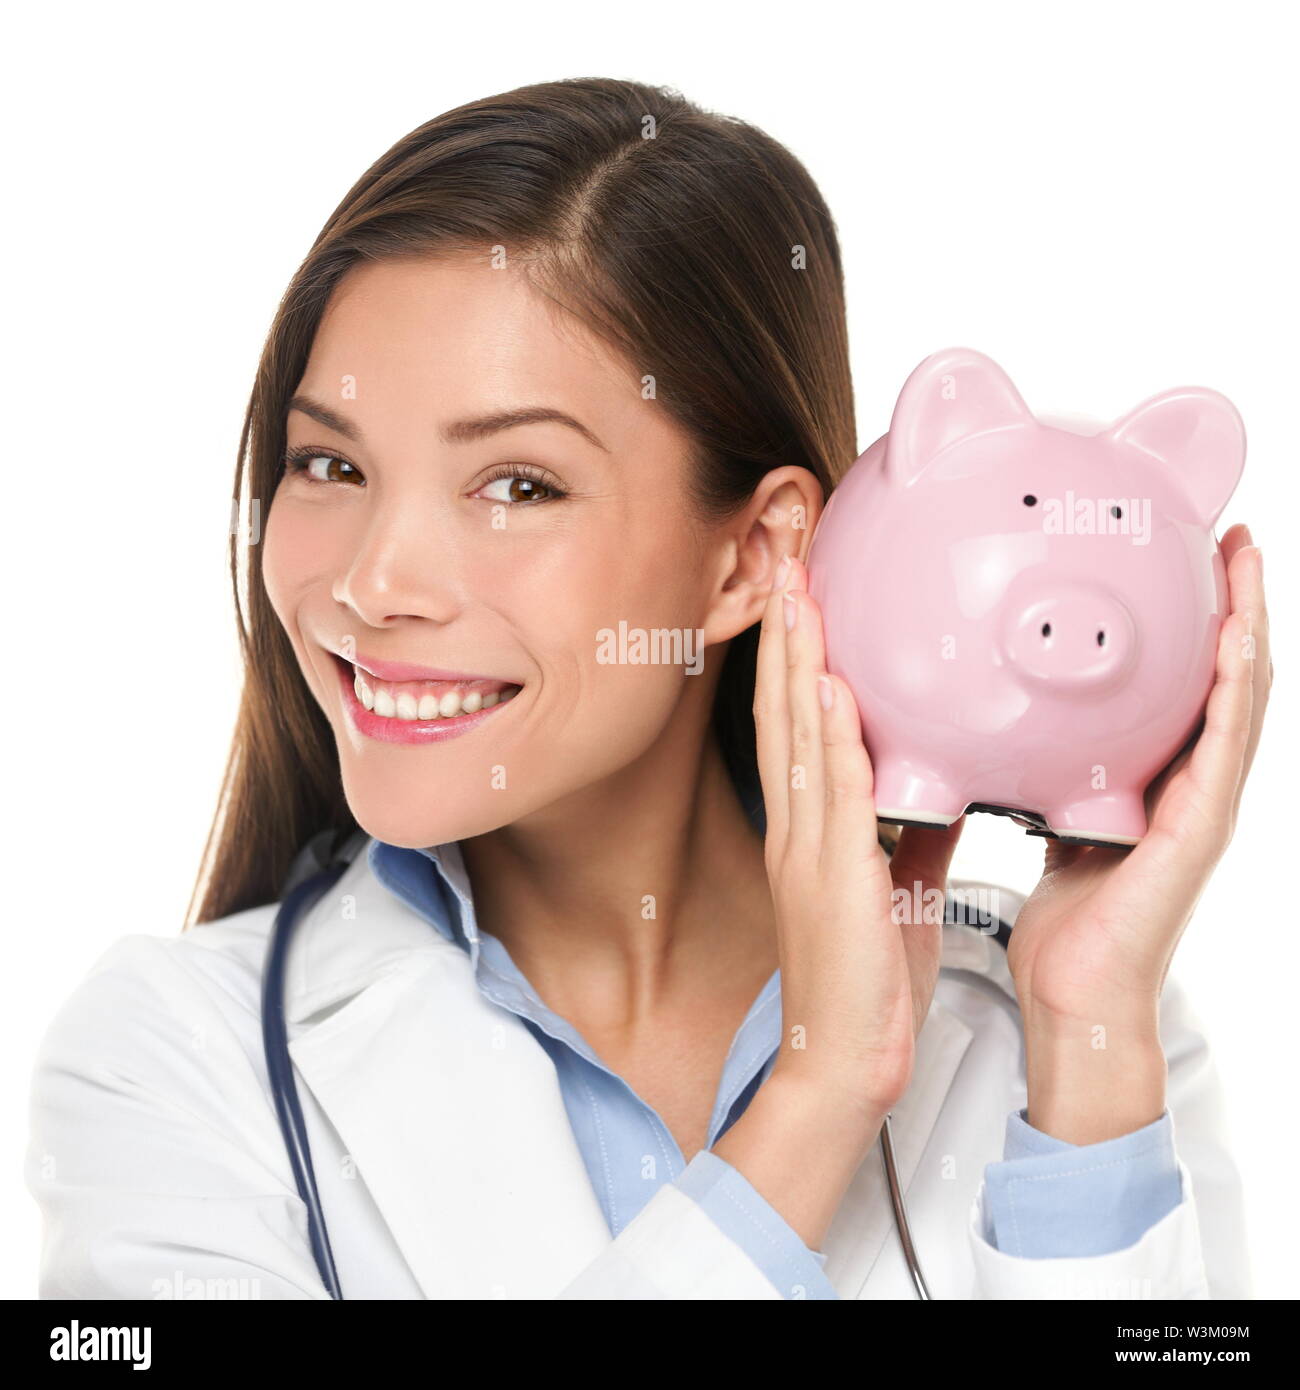 Healthcare concept - doctor holding piggy bank. Health care concept. Medical insurance or similar. Happy doctor woman shaking piggy bank looking smiling. Nurse or physician money concept isolated. Stock Photo